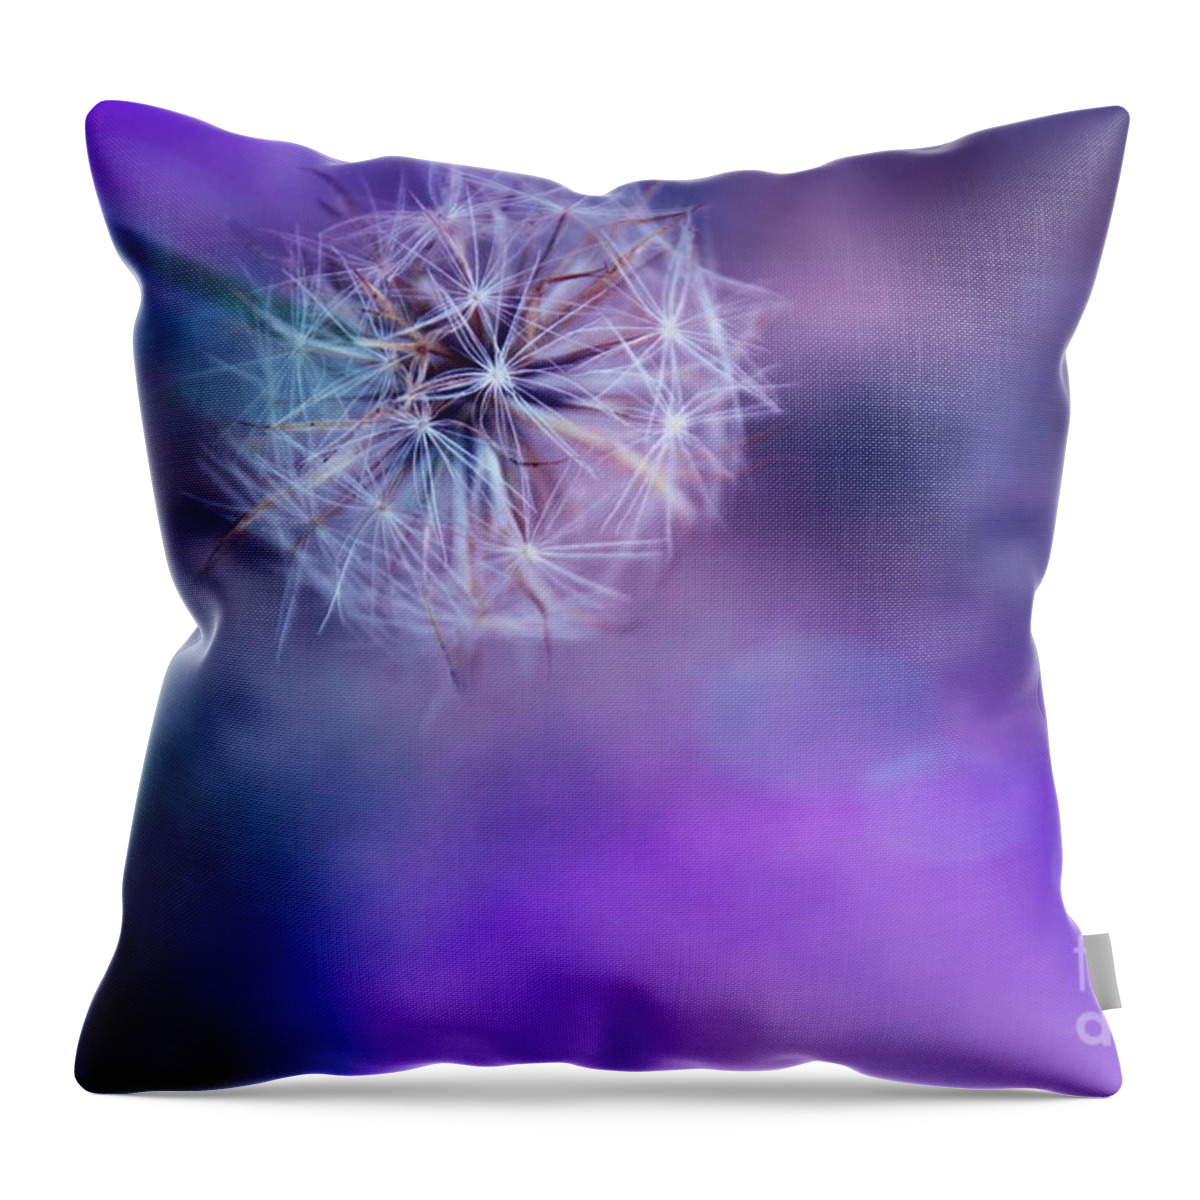 Adrian-deleon Throw Pillow featuring the photograph Fantasy Wishes -Macro Dandelion by Adrian De Leon Art and Photography